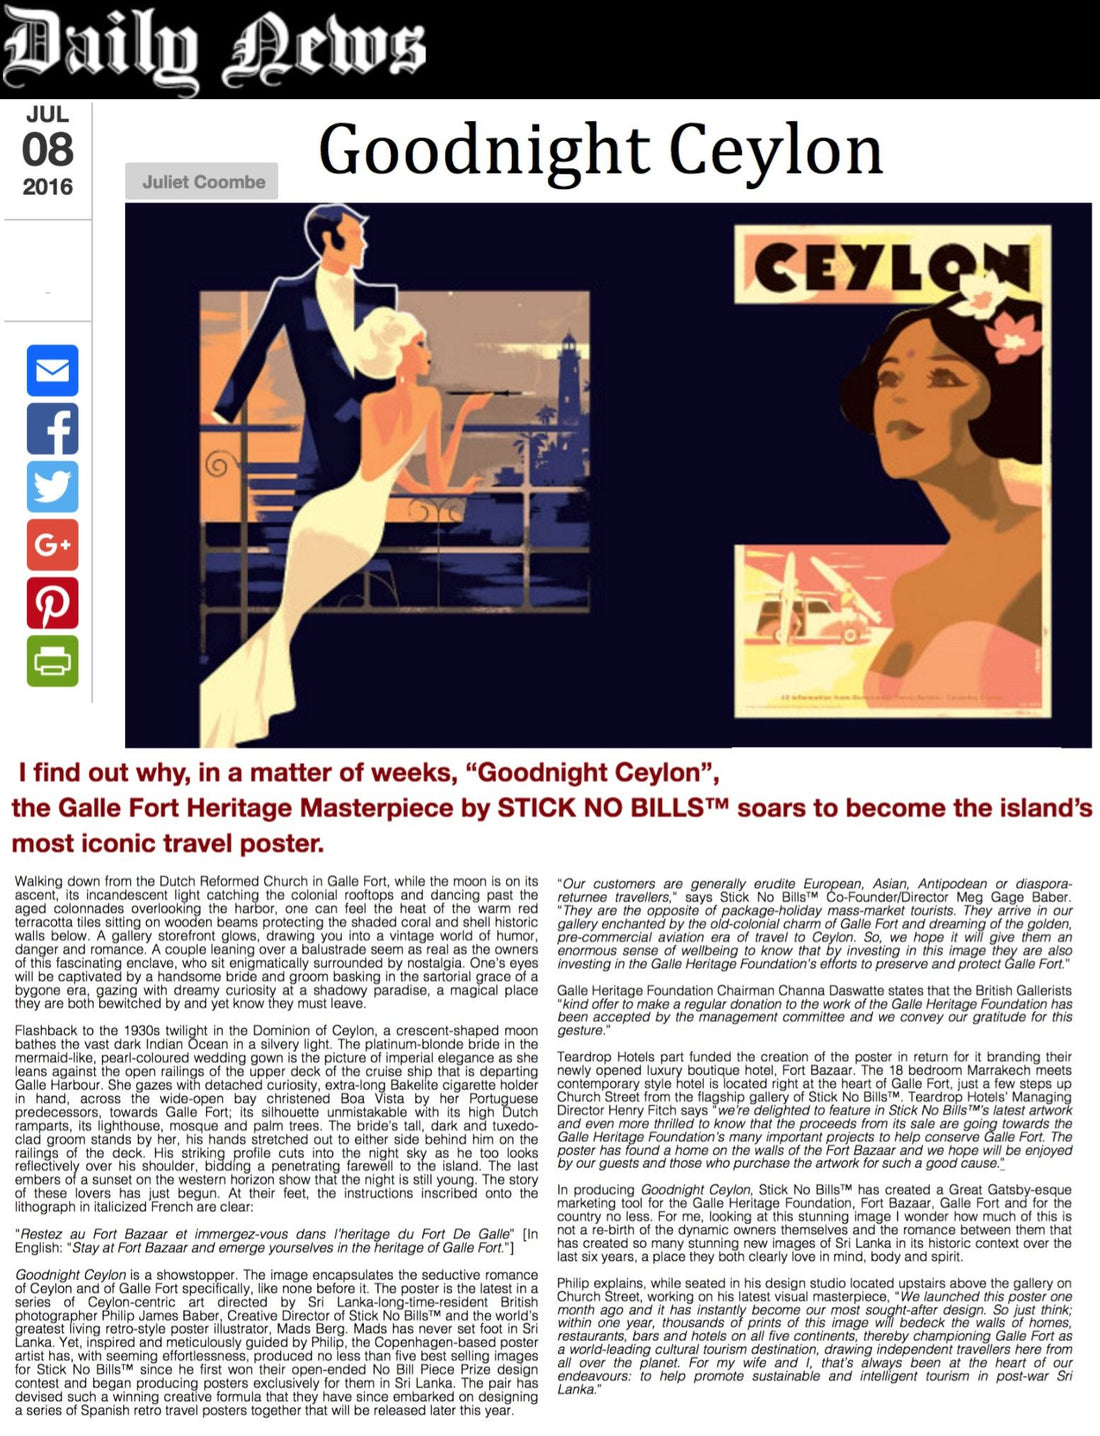 Article image of how Good Night Ceylon soars to become Sri Lanka's most iconic travel poster.